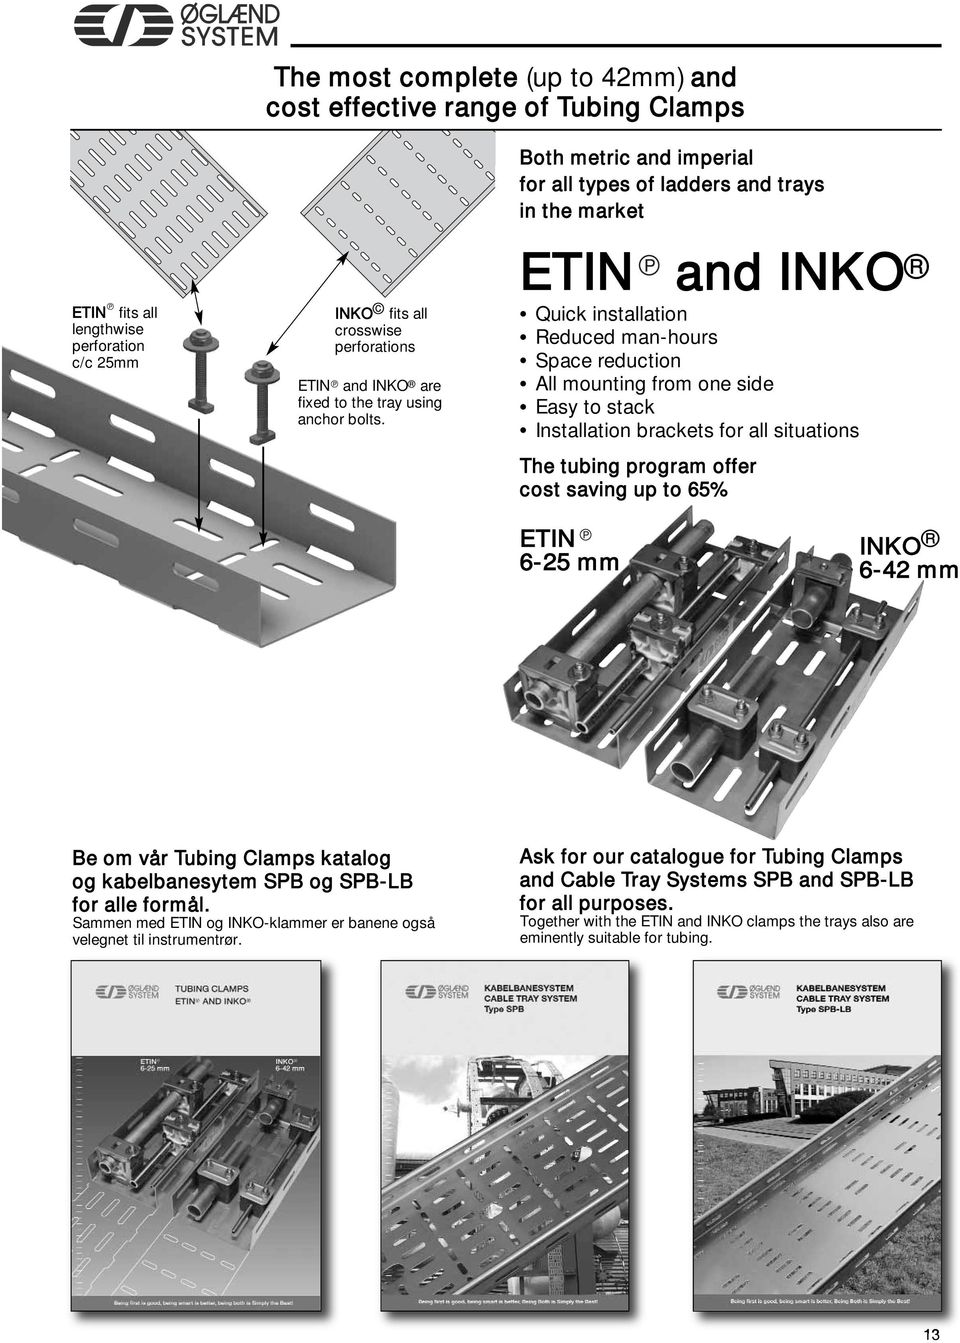 ETIN and INKO Quick installation Reduced man-hours Space reduction All mounting from one side Easy to stack Installation brackets for all situations The tubing program offer cost saving up to 65%